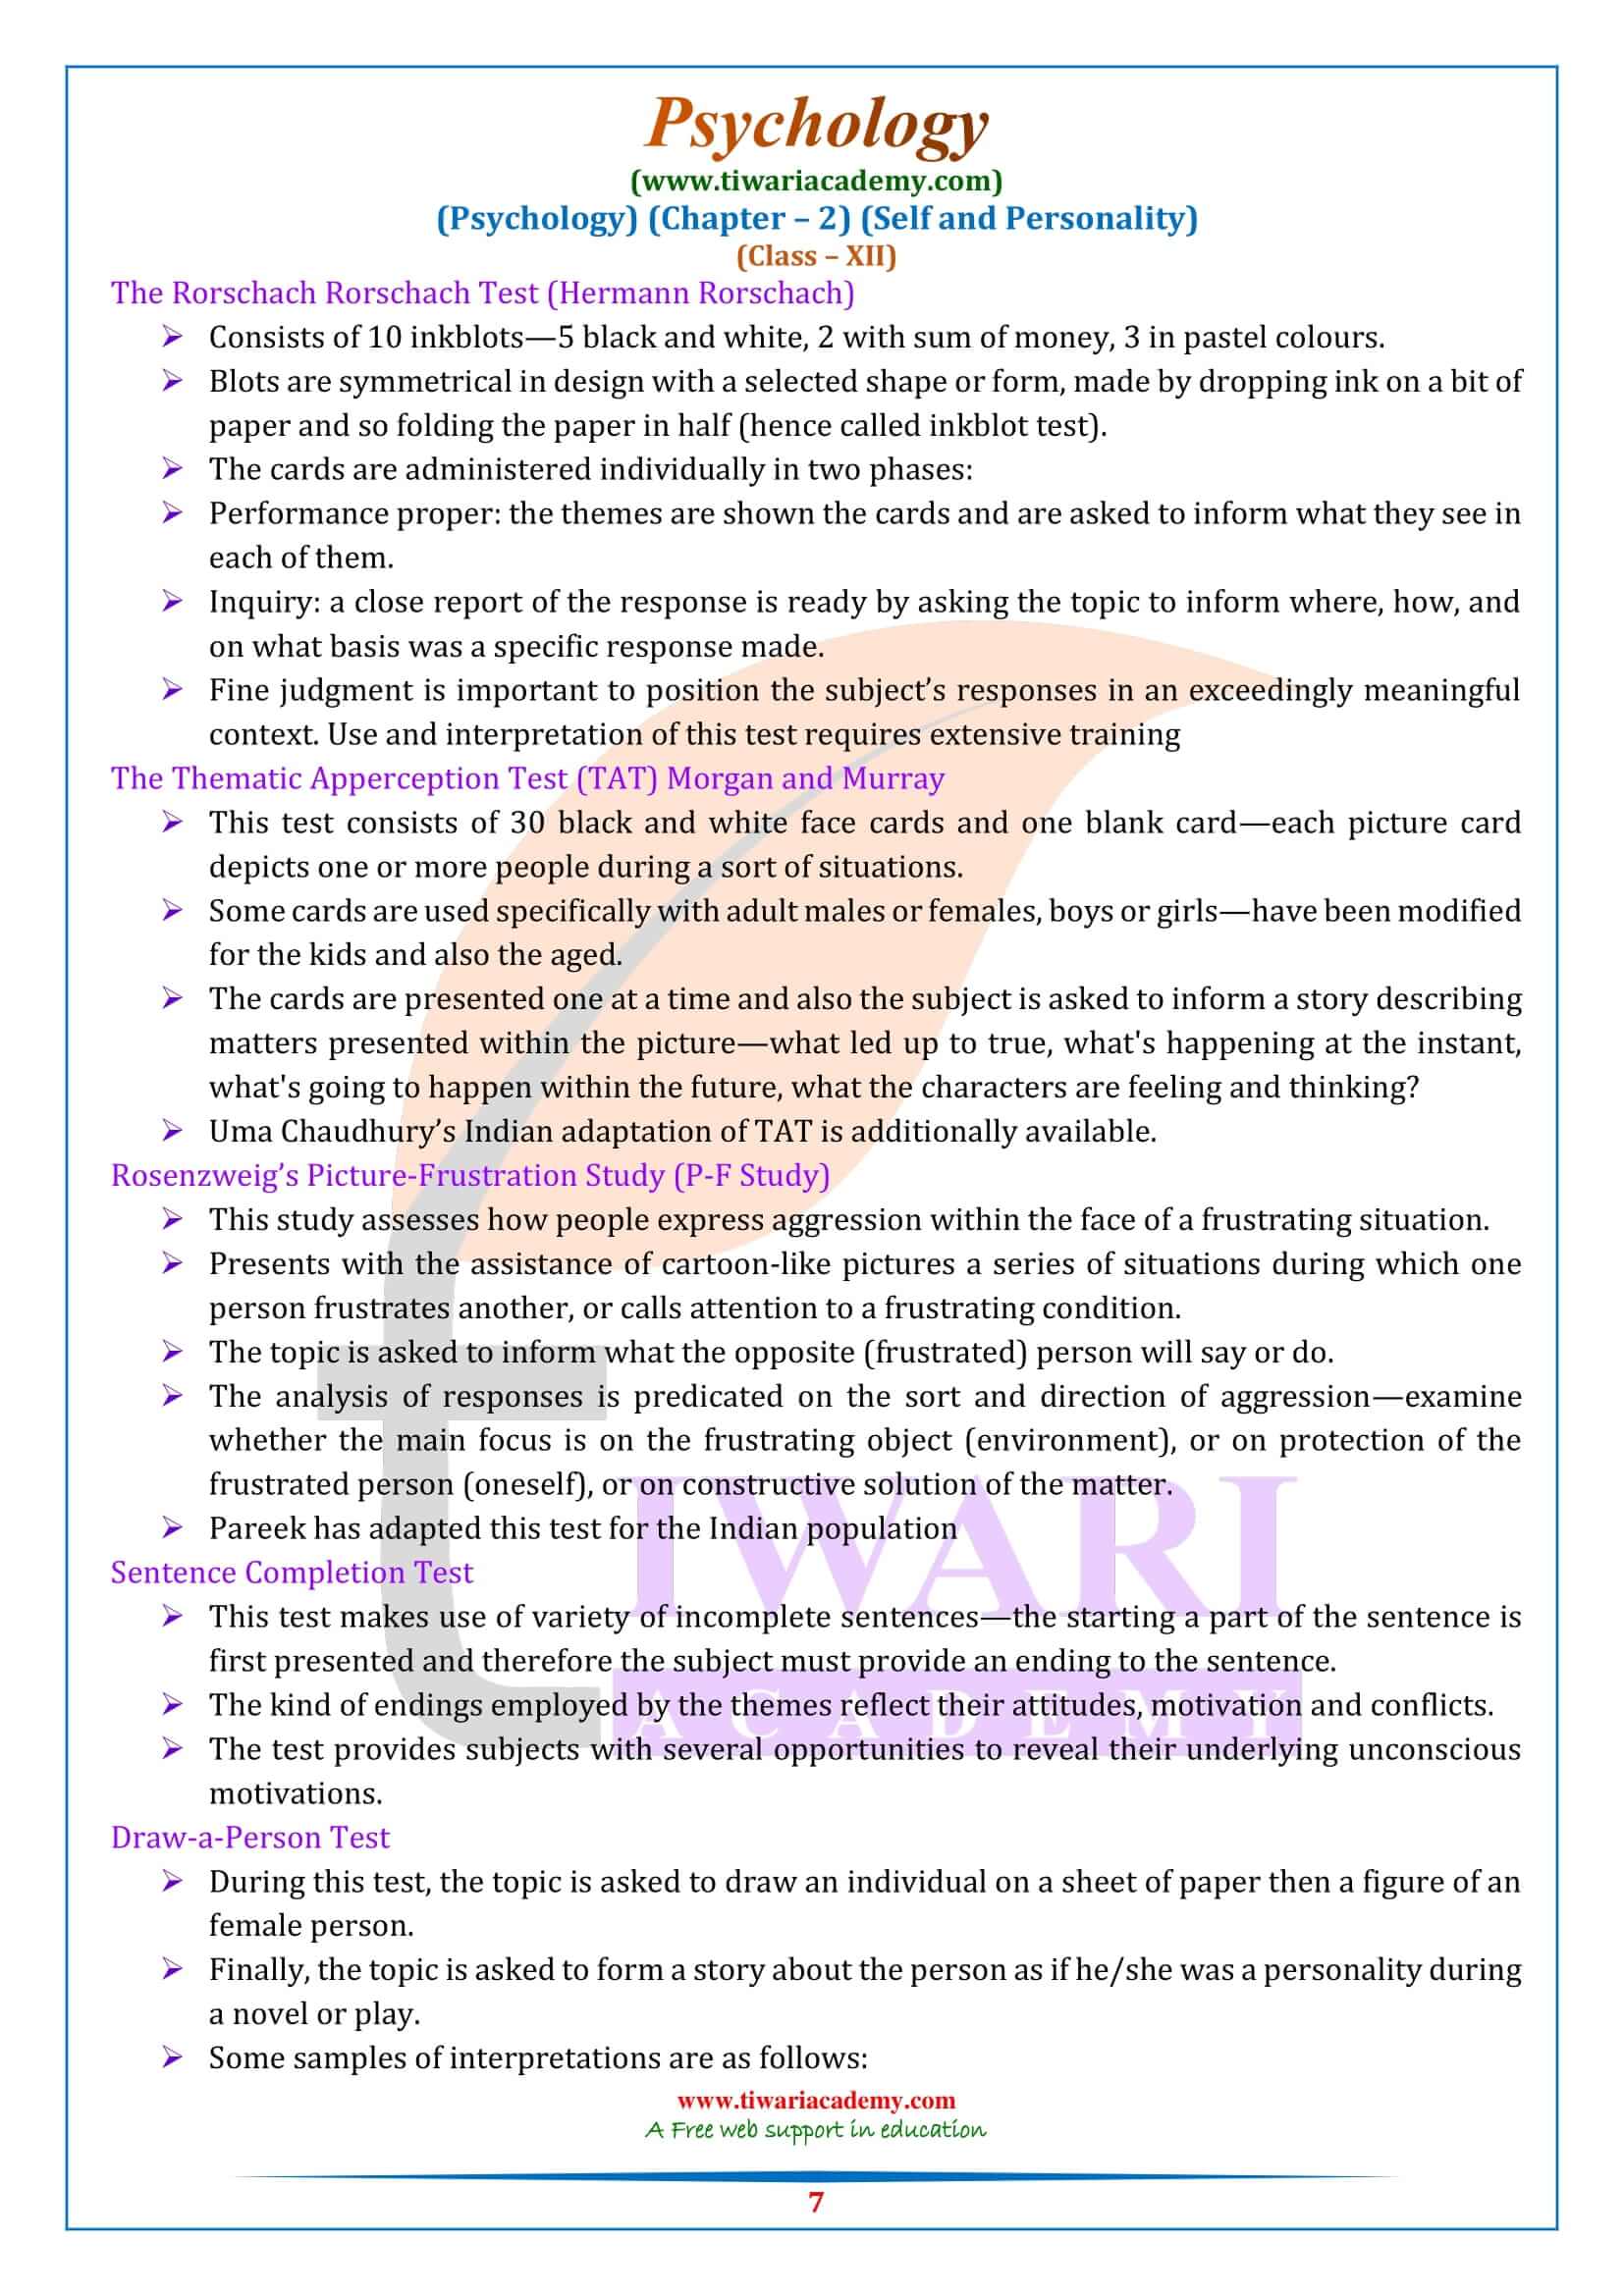 NCERT Solutions for Class 12 Psychology Chapter 2 guide